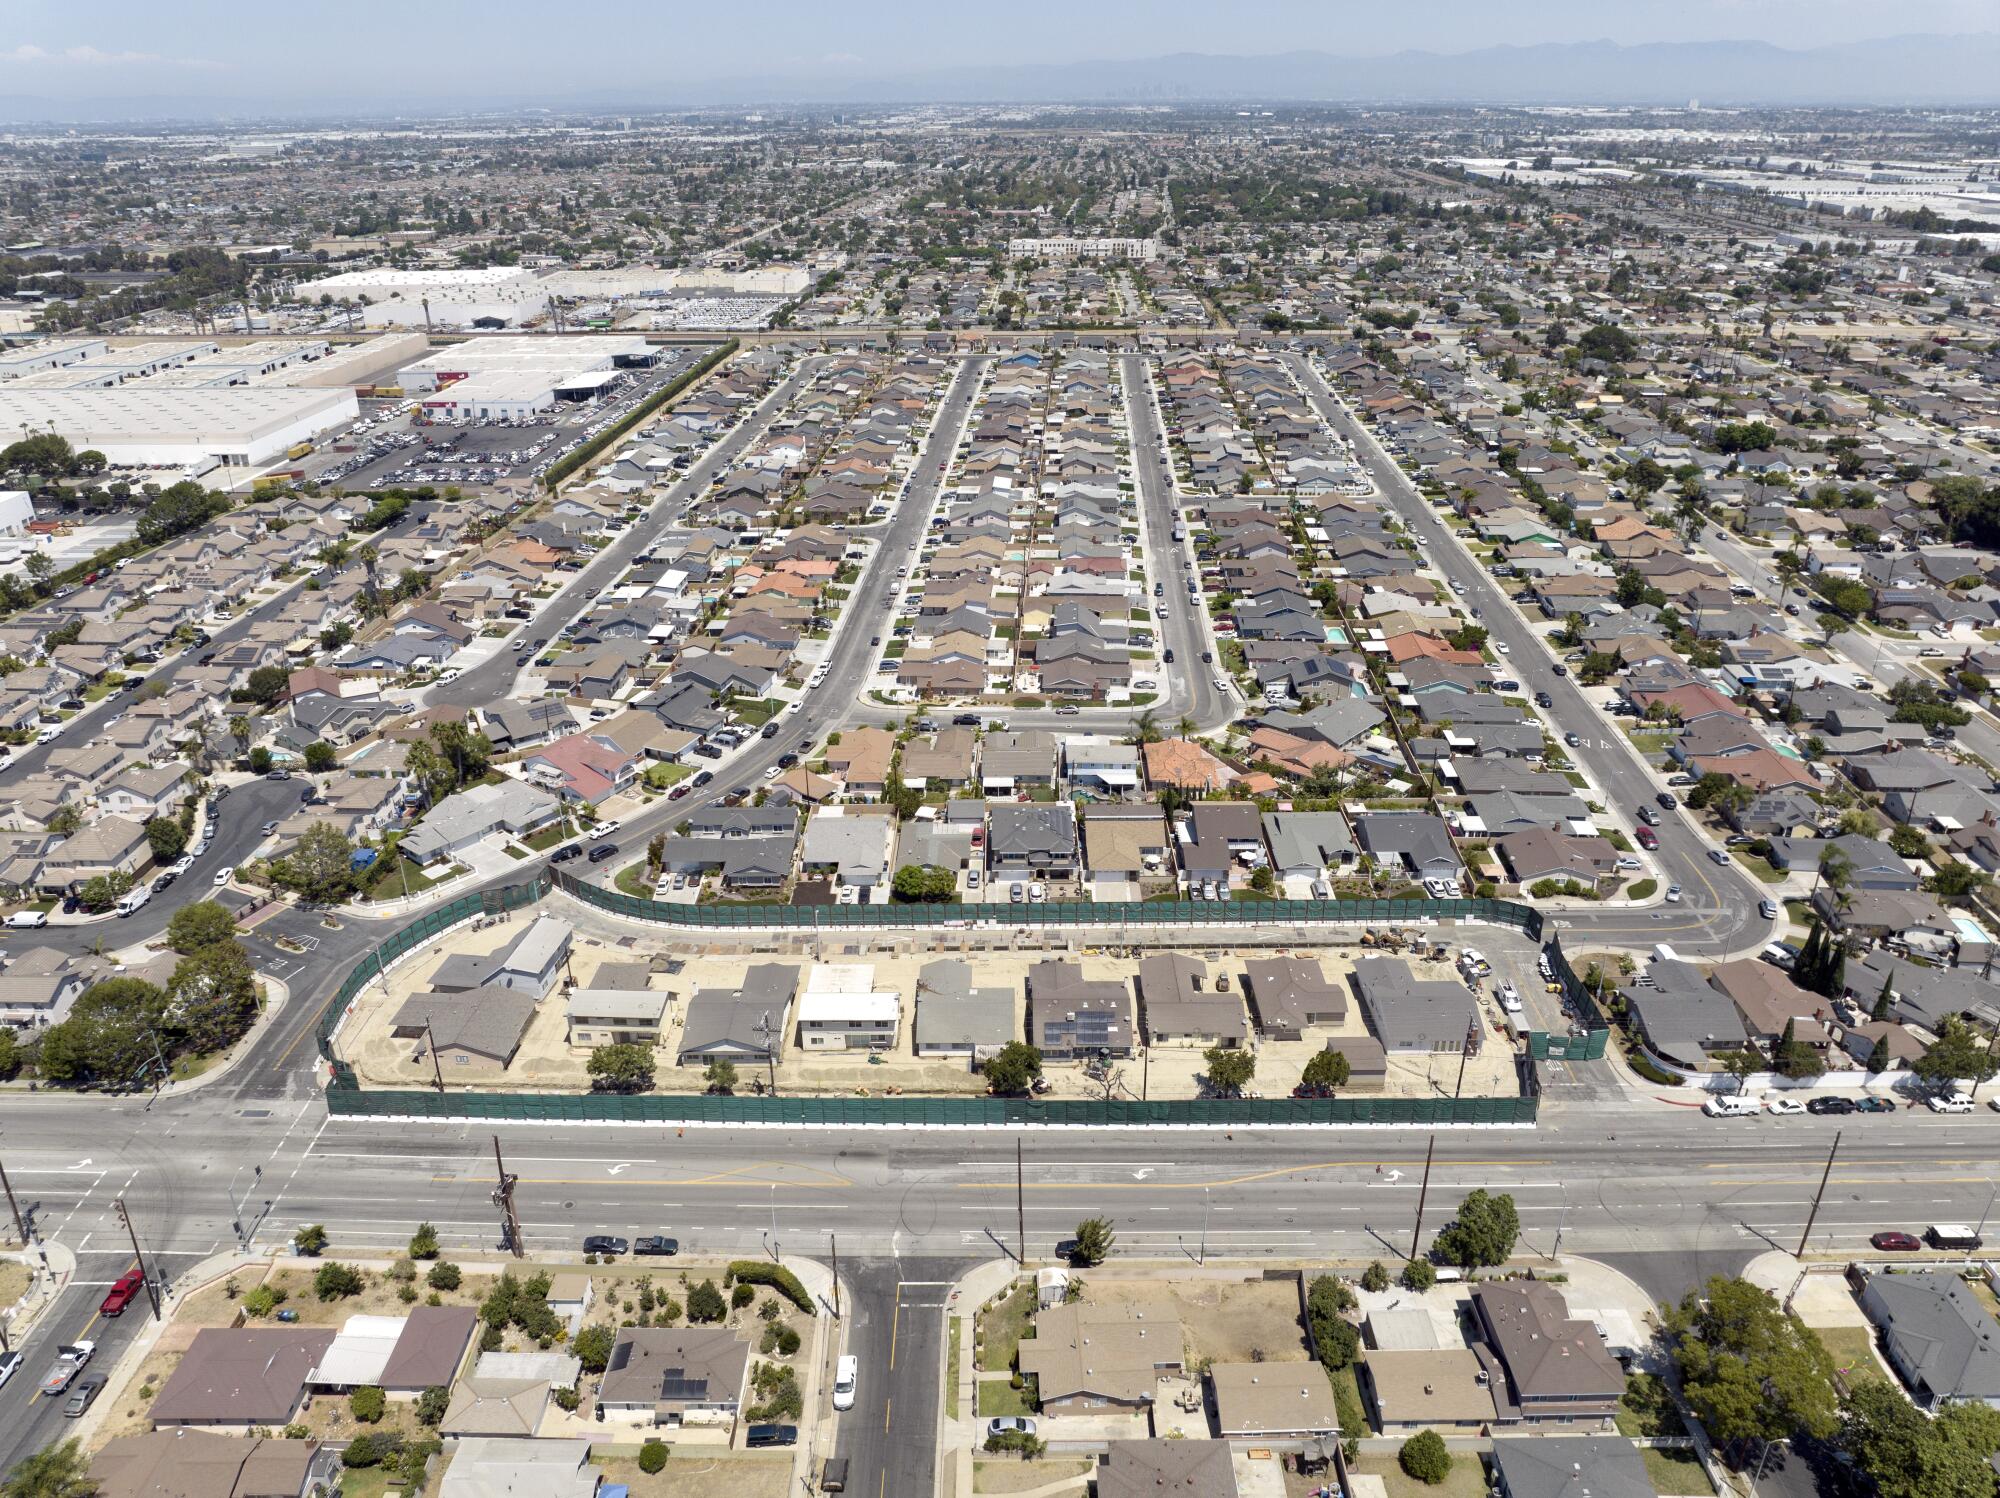 The Carousel neighborhood of Carson was heavily polluted by Shell and other companies. 